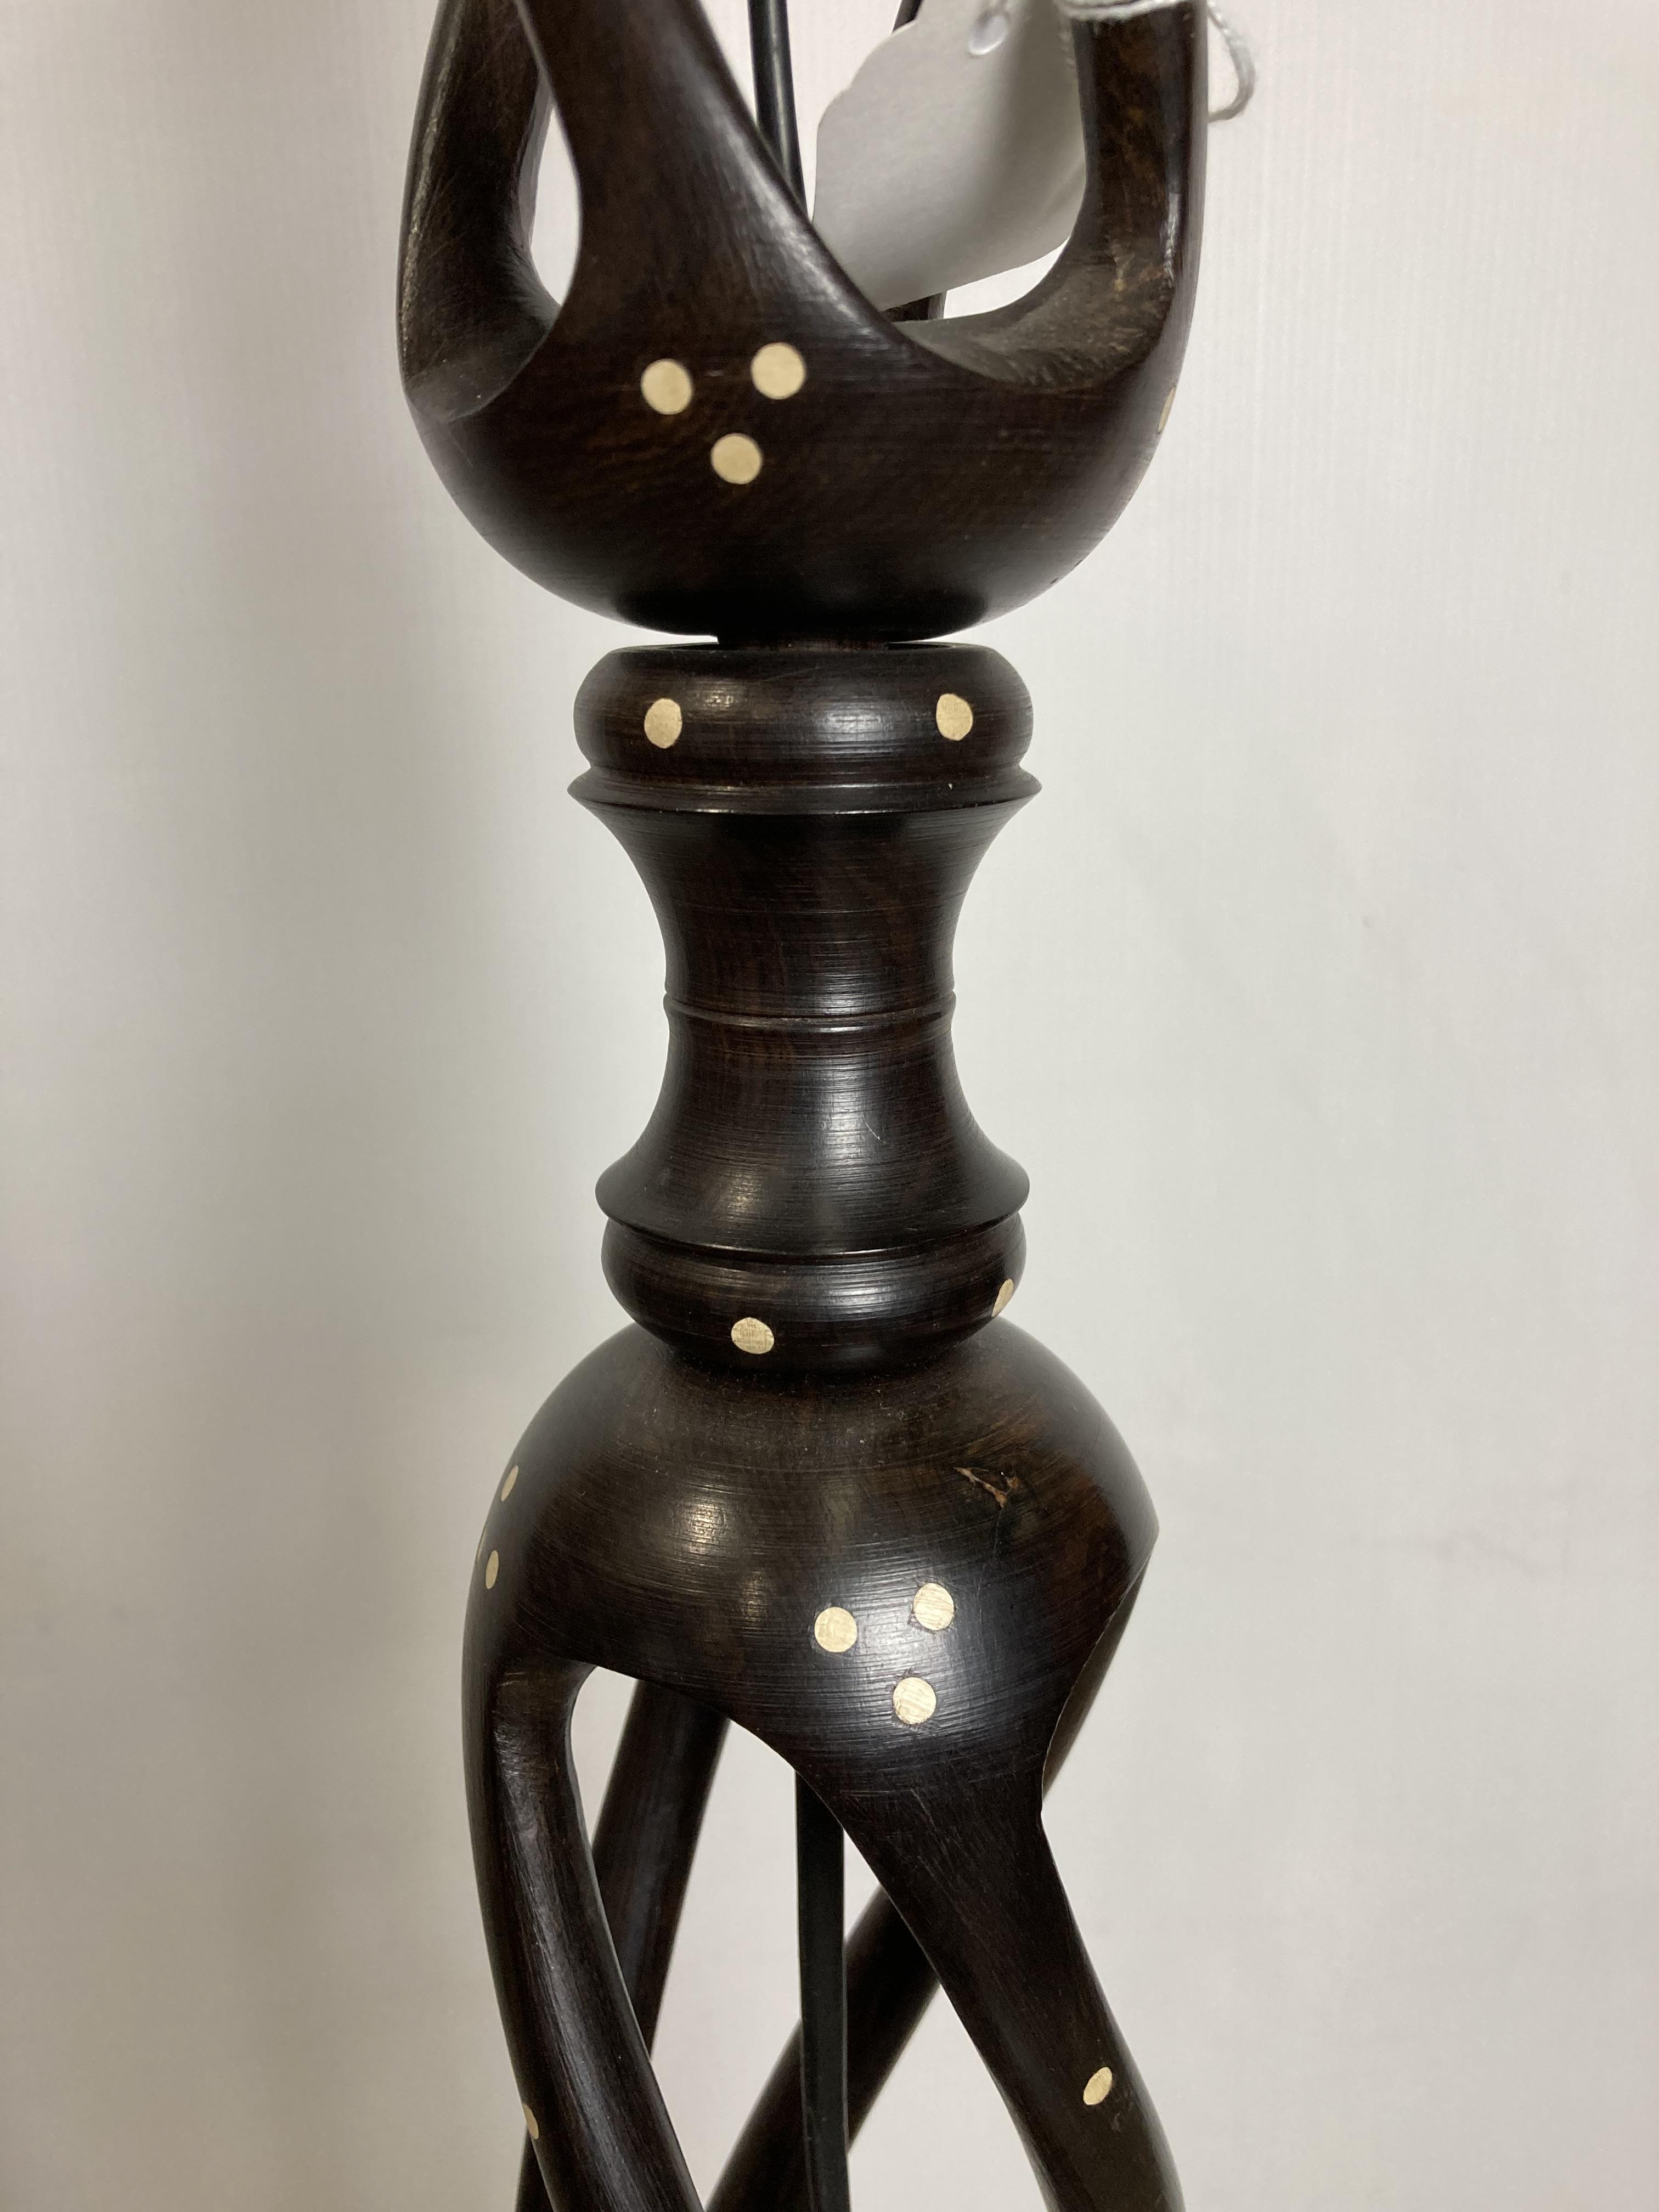 Beautiful ebony wooden turned standard lamp with four-stem twisted column inlaid with white spots - Image 3 of 4